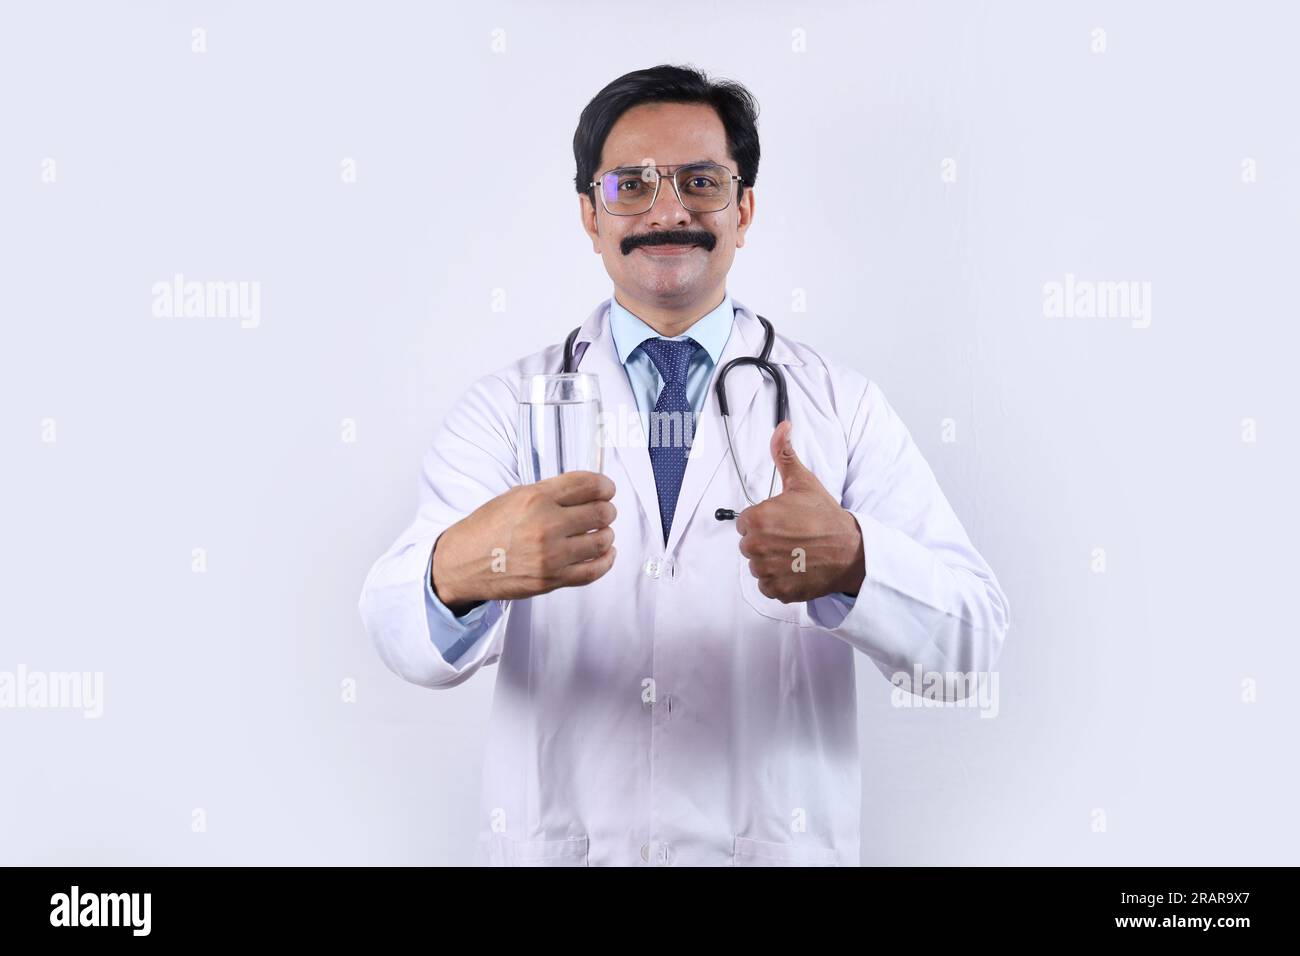 Doctor recommending nutritional diets and drinks for a better health. Stock Photo